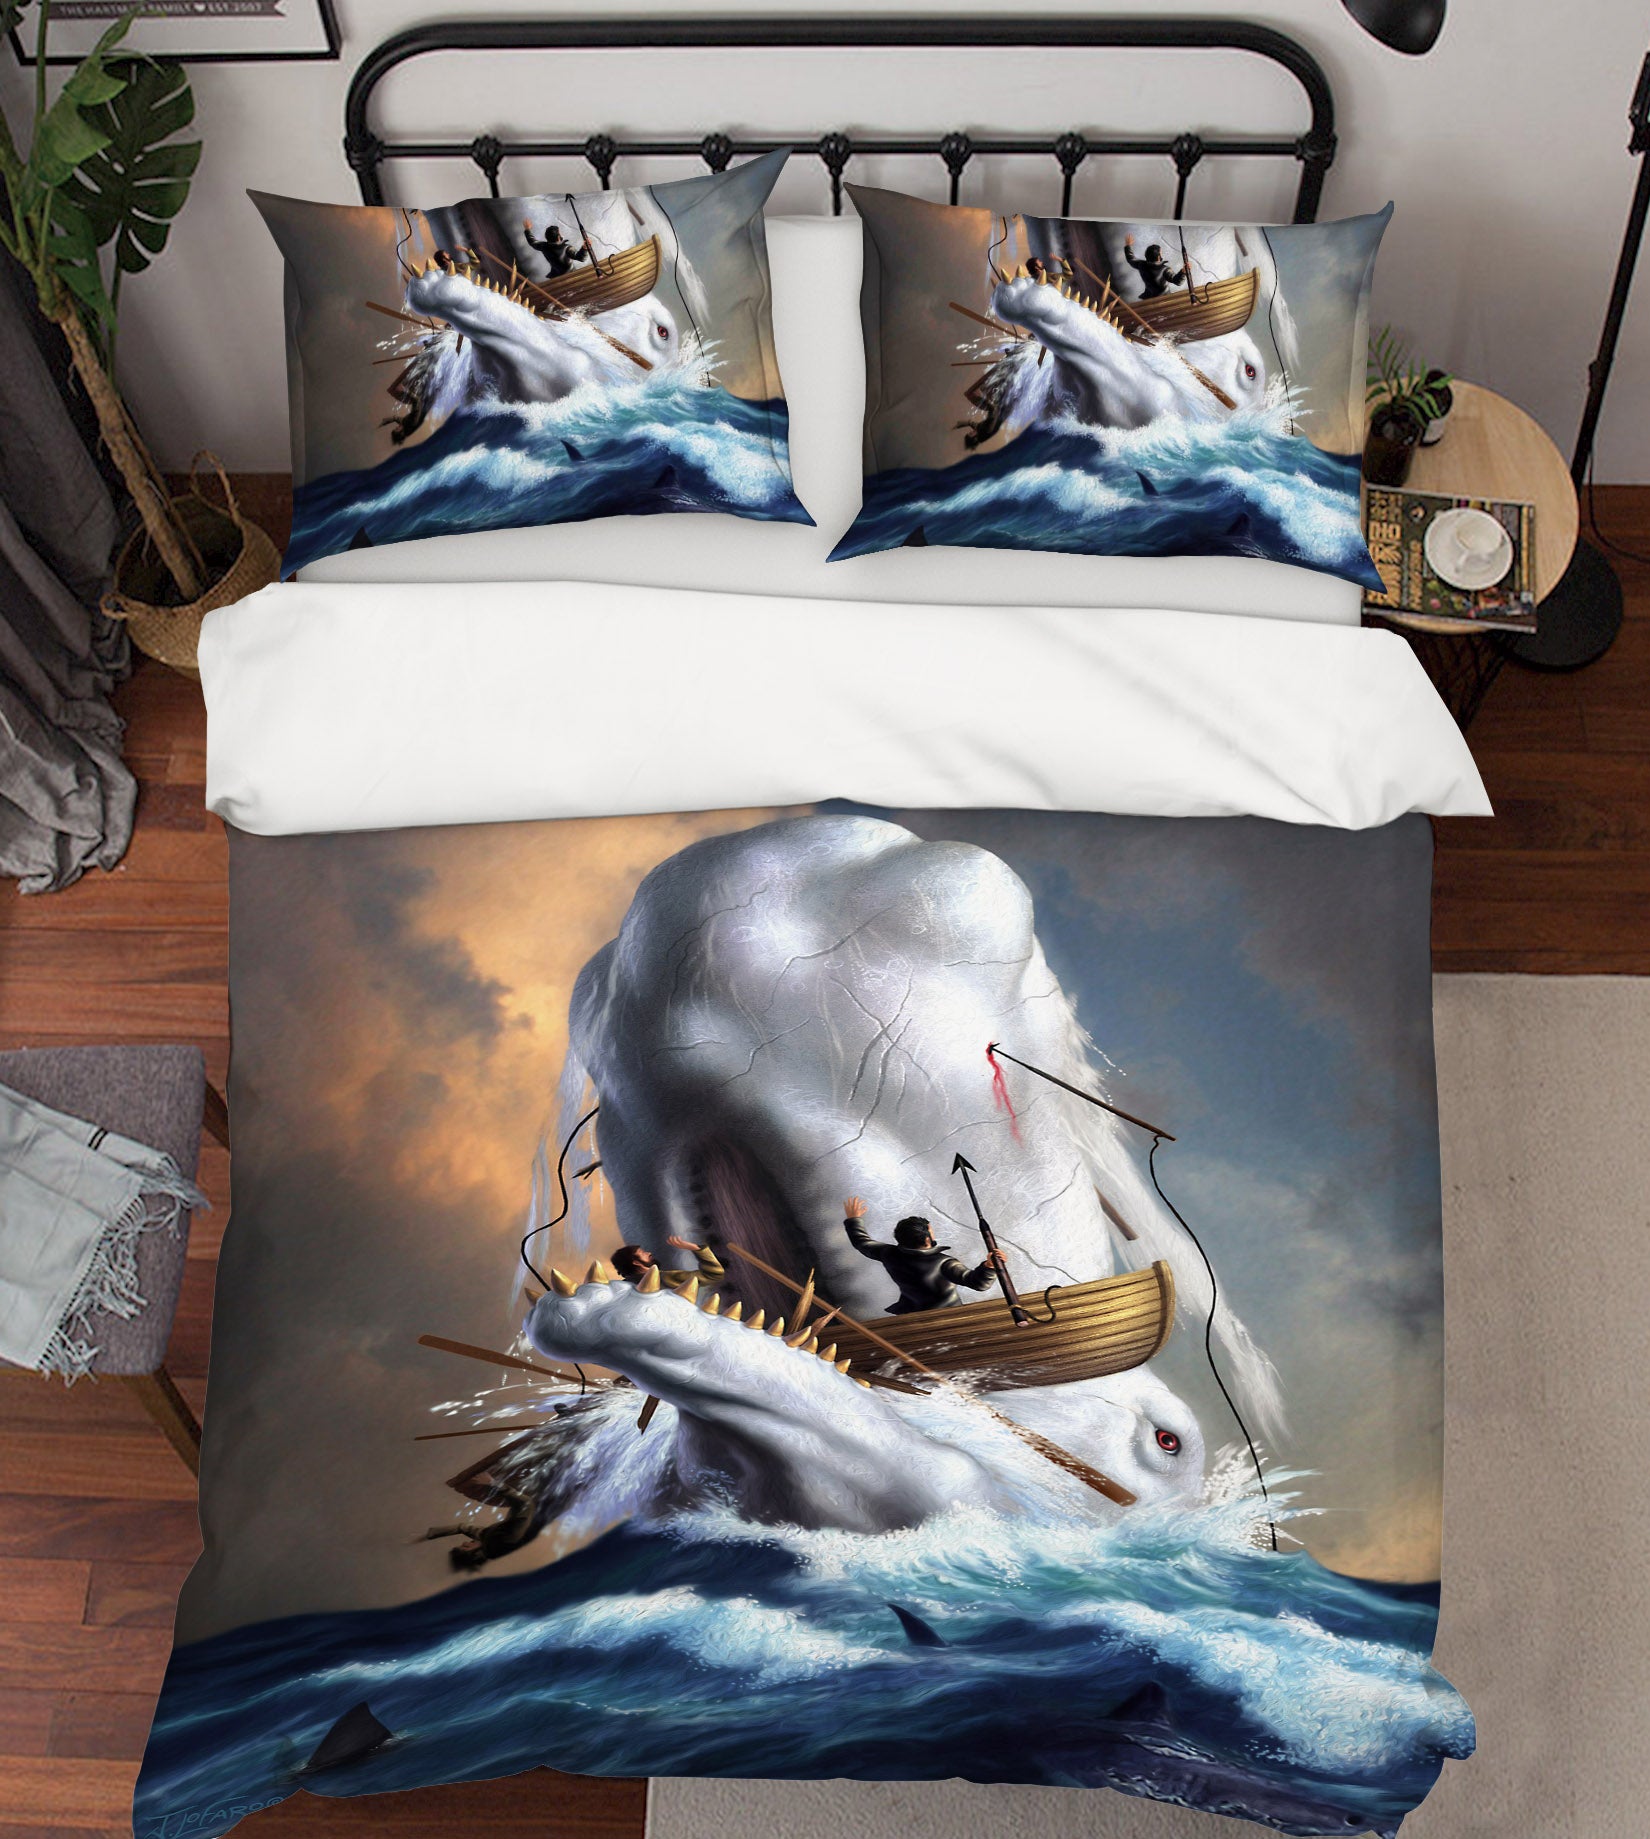 3D Waves Ferry 86032 Jerry LoFaro bedding Bed Pillowcases Quilt